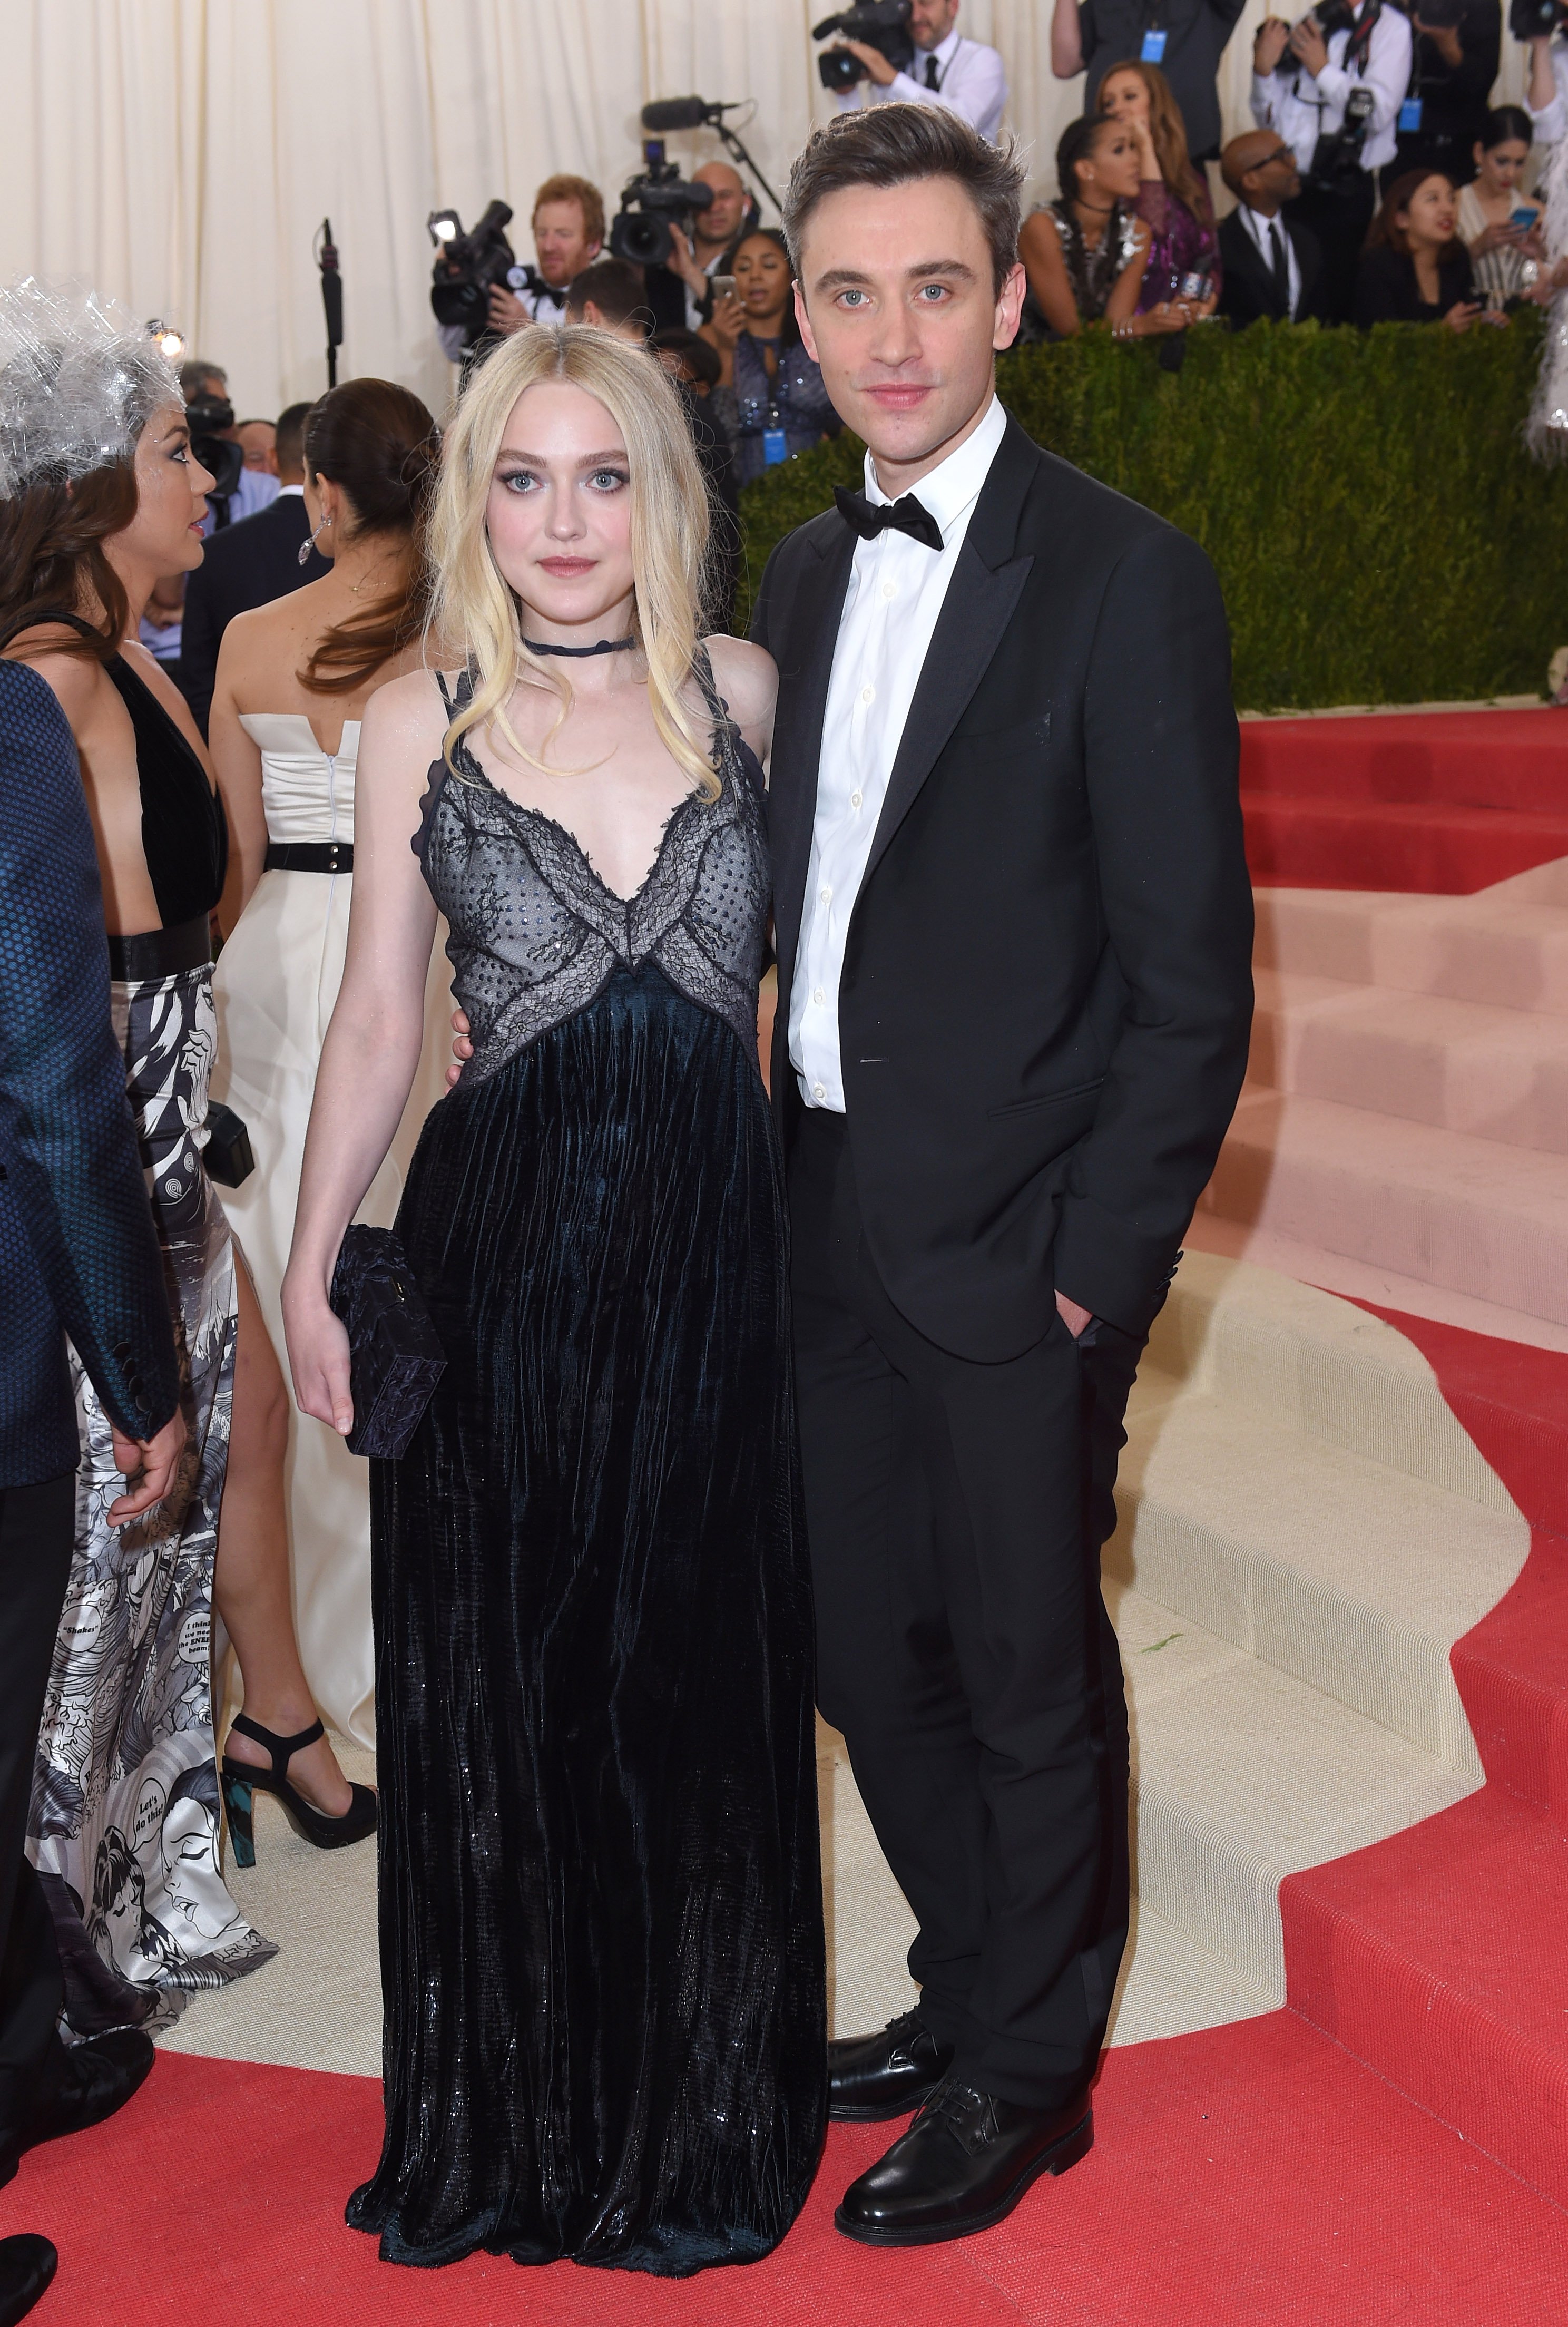 Dakota Fanning and Jamie Strachan arrive for the "Manus x Machina: Fashion In An Age Of Technology" Costume Institute Gala at Metropolitan Museum of Art in New York City on May 2, 2016 | Source: Getty Images